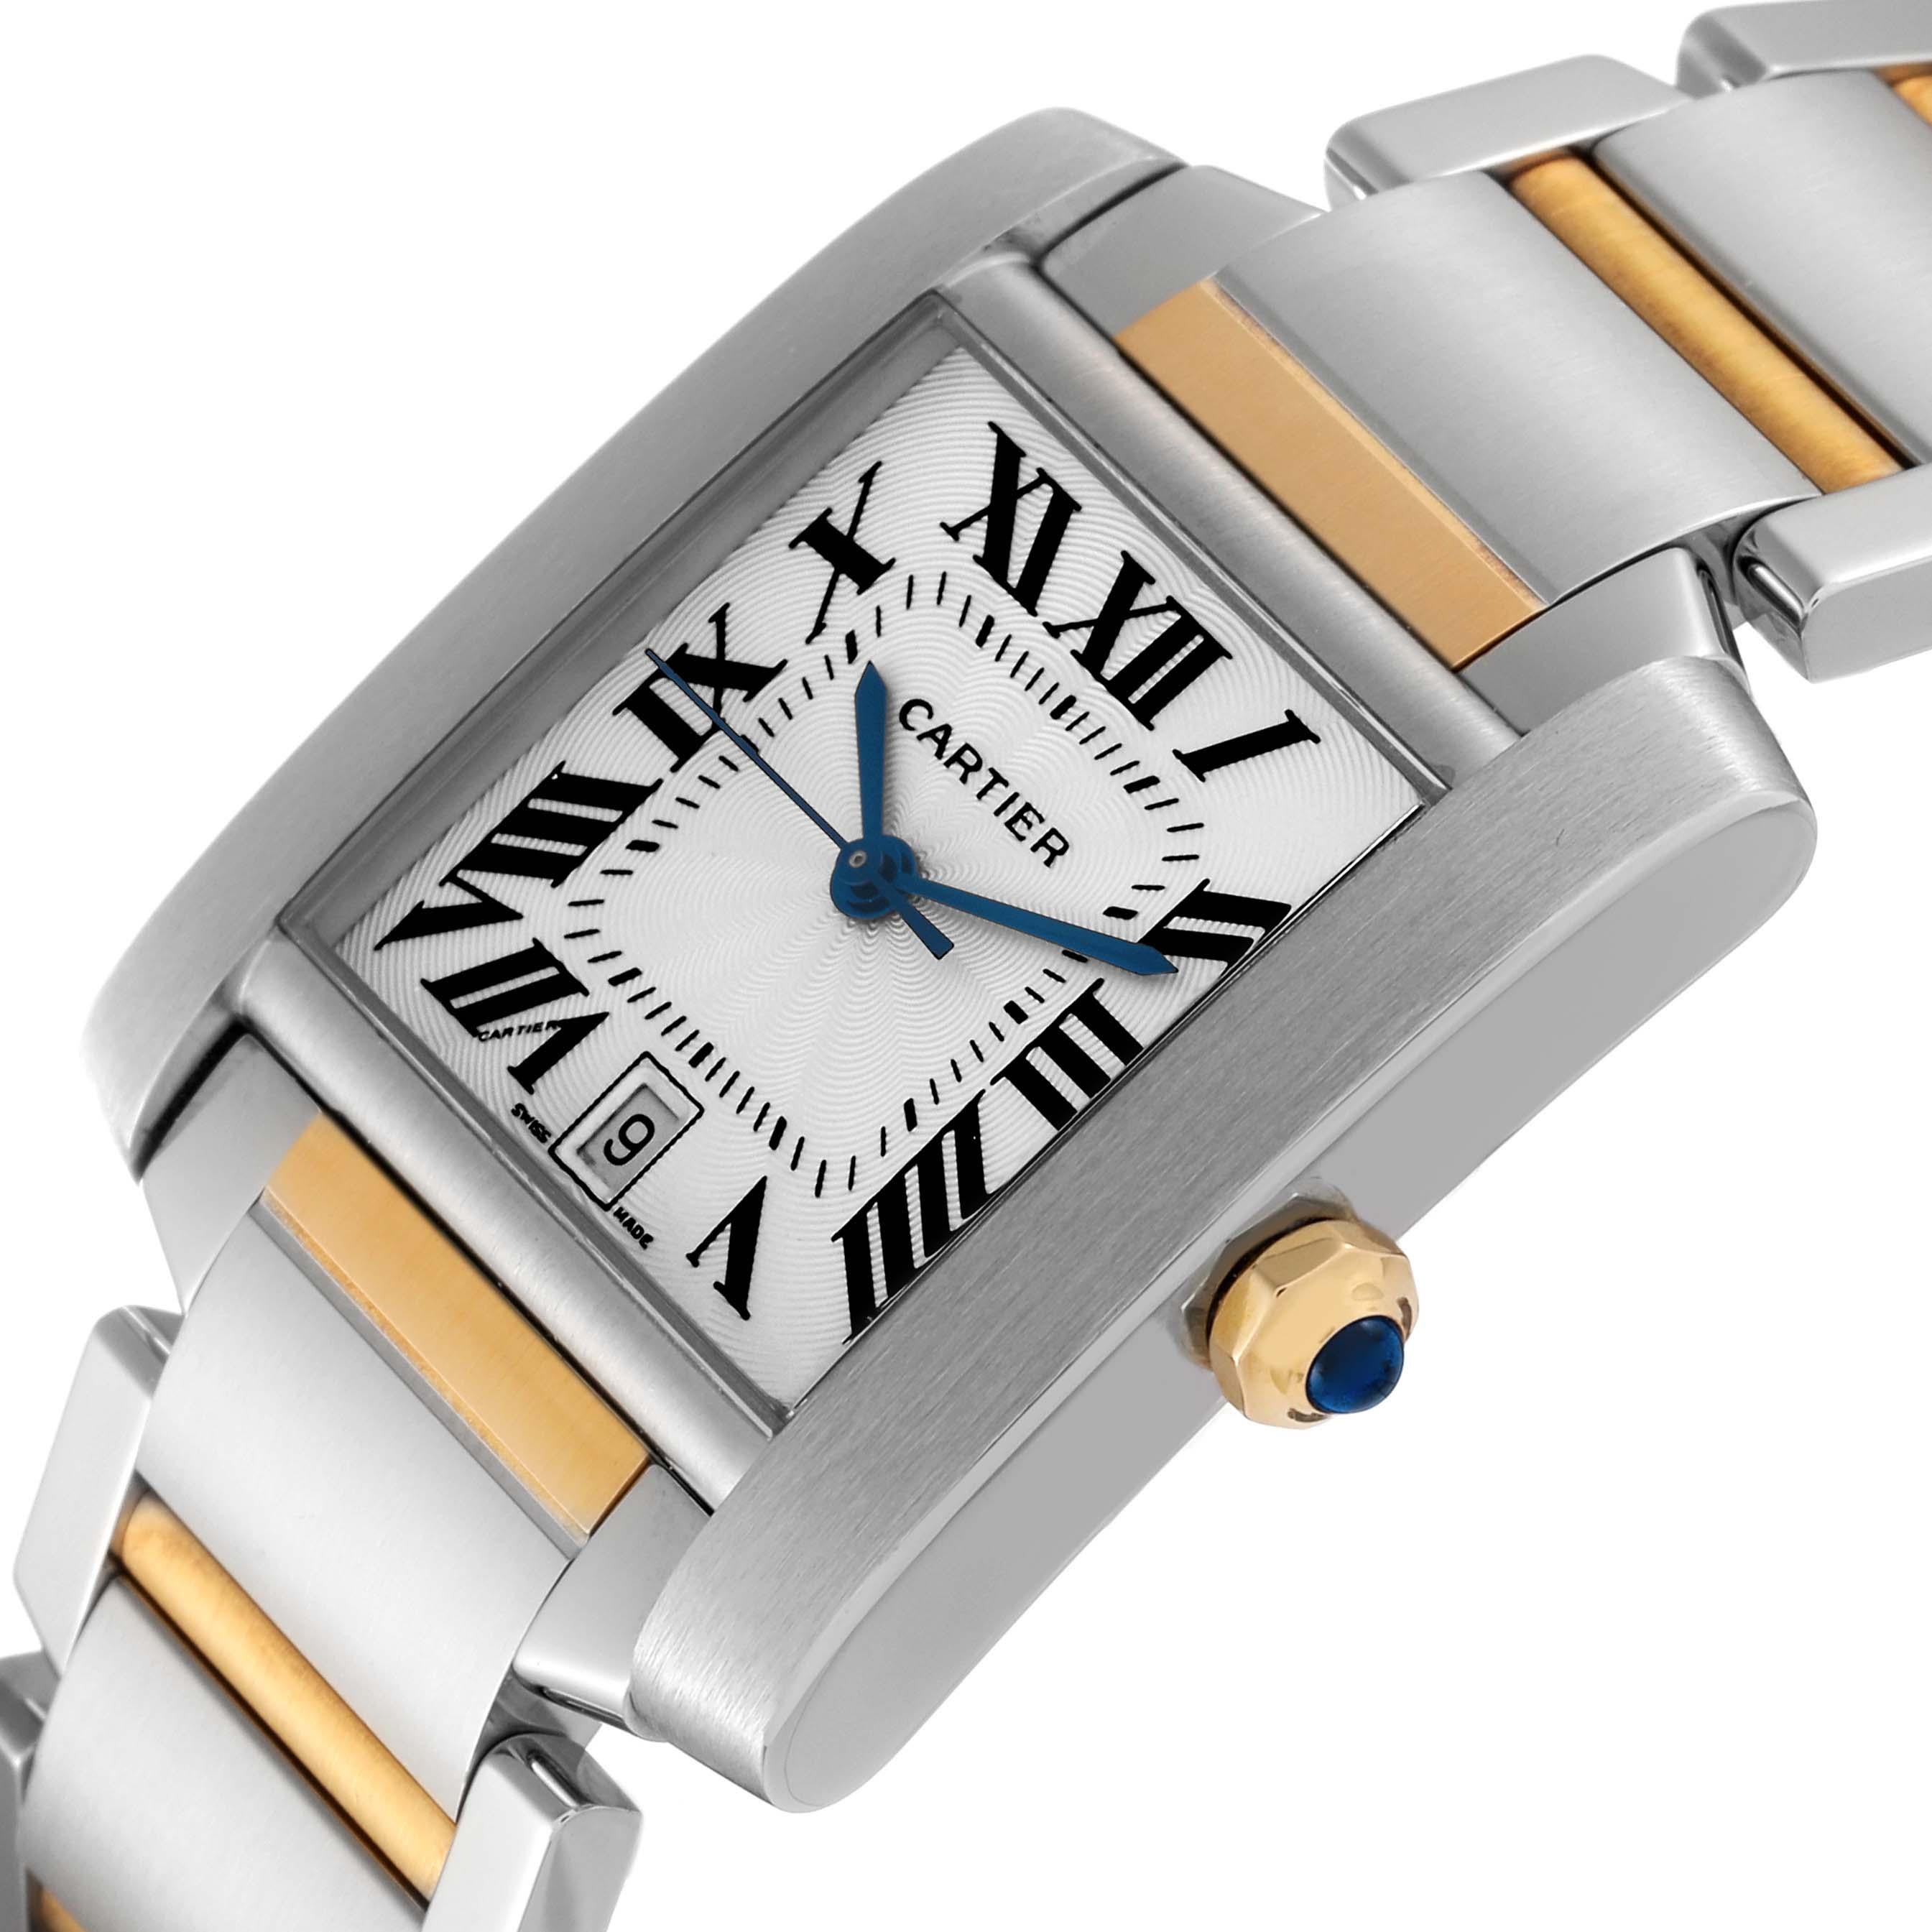 Cartier Tank Francaise Steel Yellow Gold Silver Dial Mens Watch W51005Q4 For Sale 1